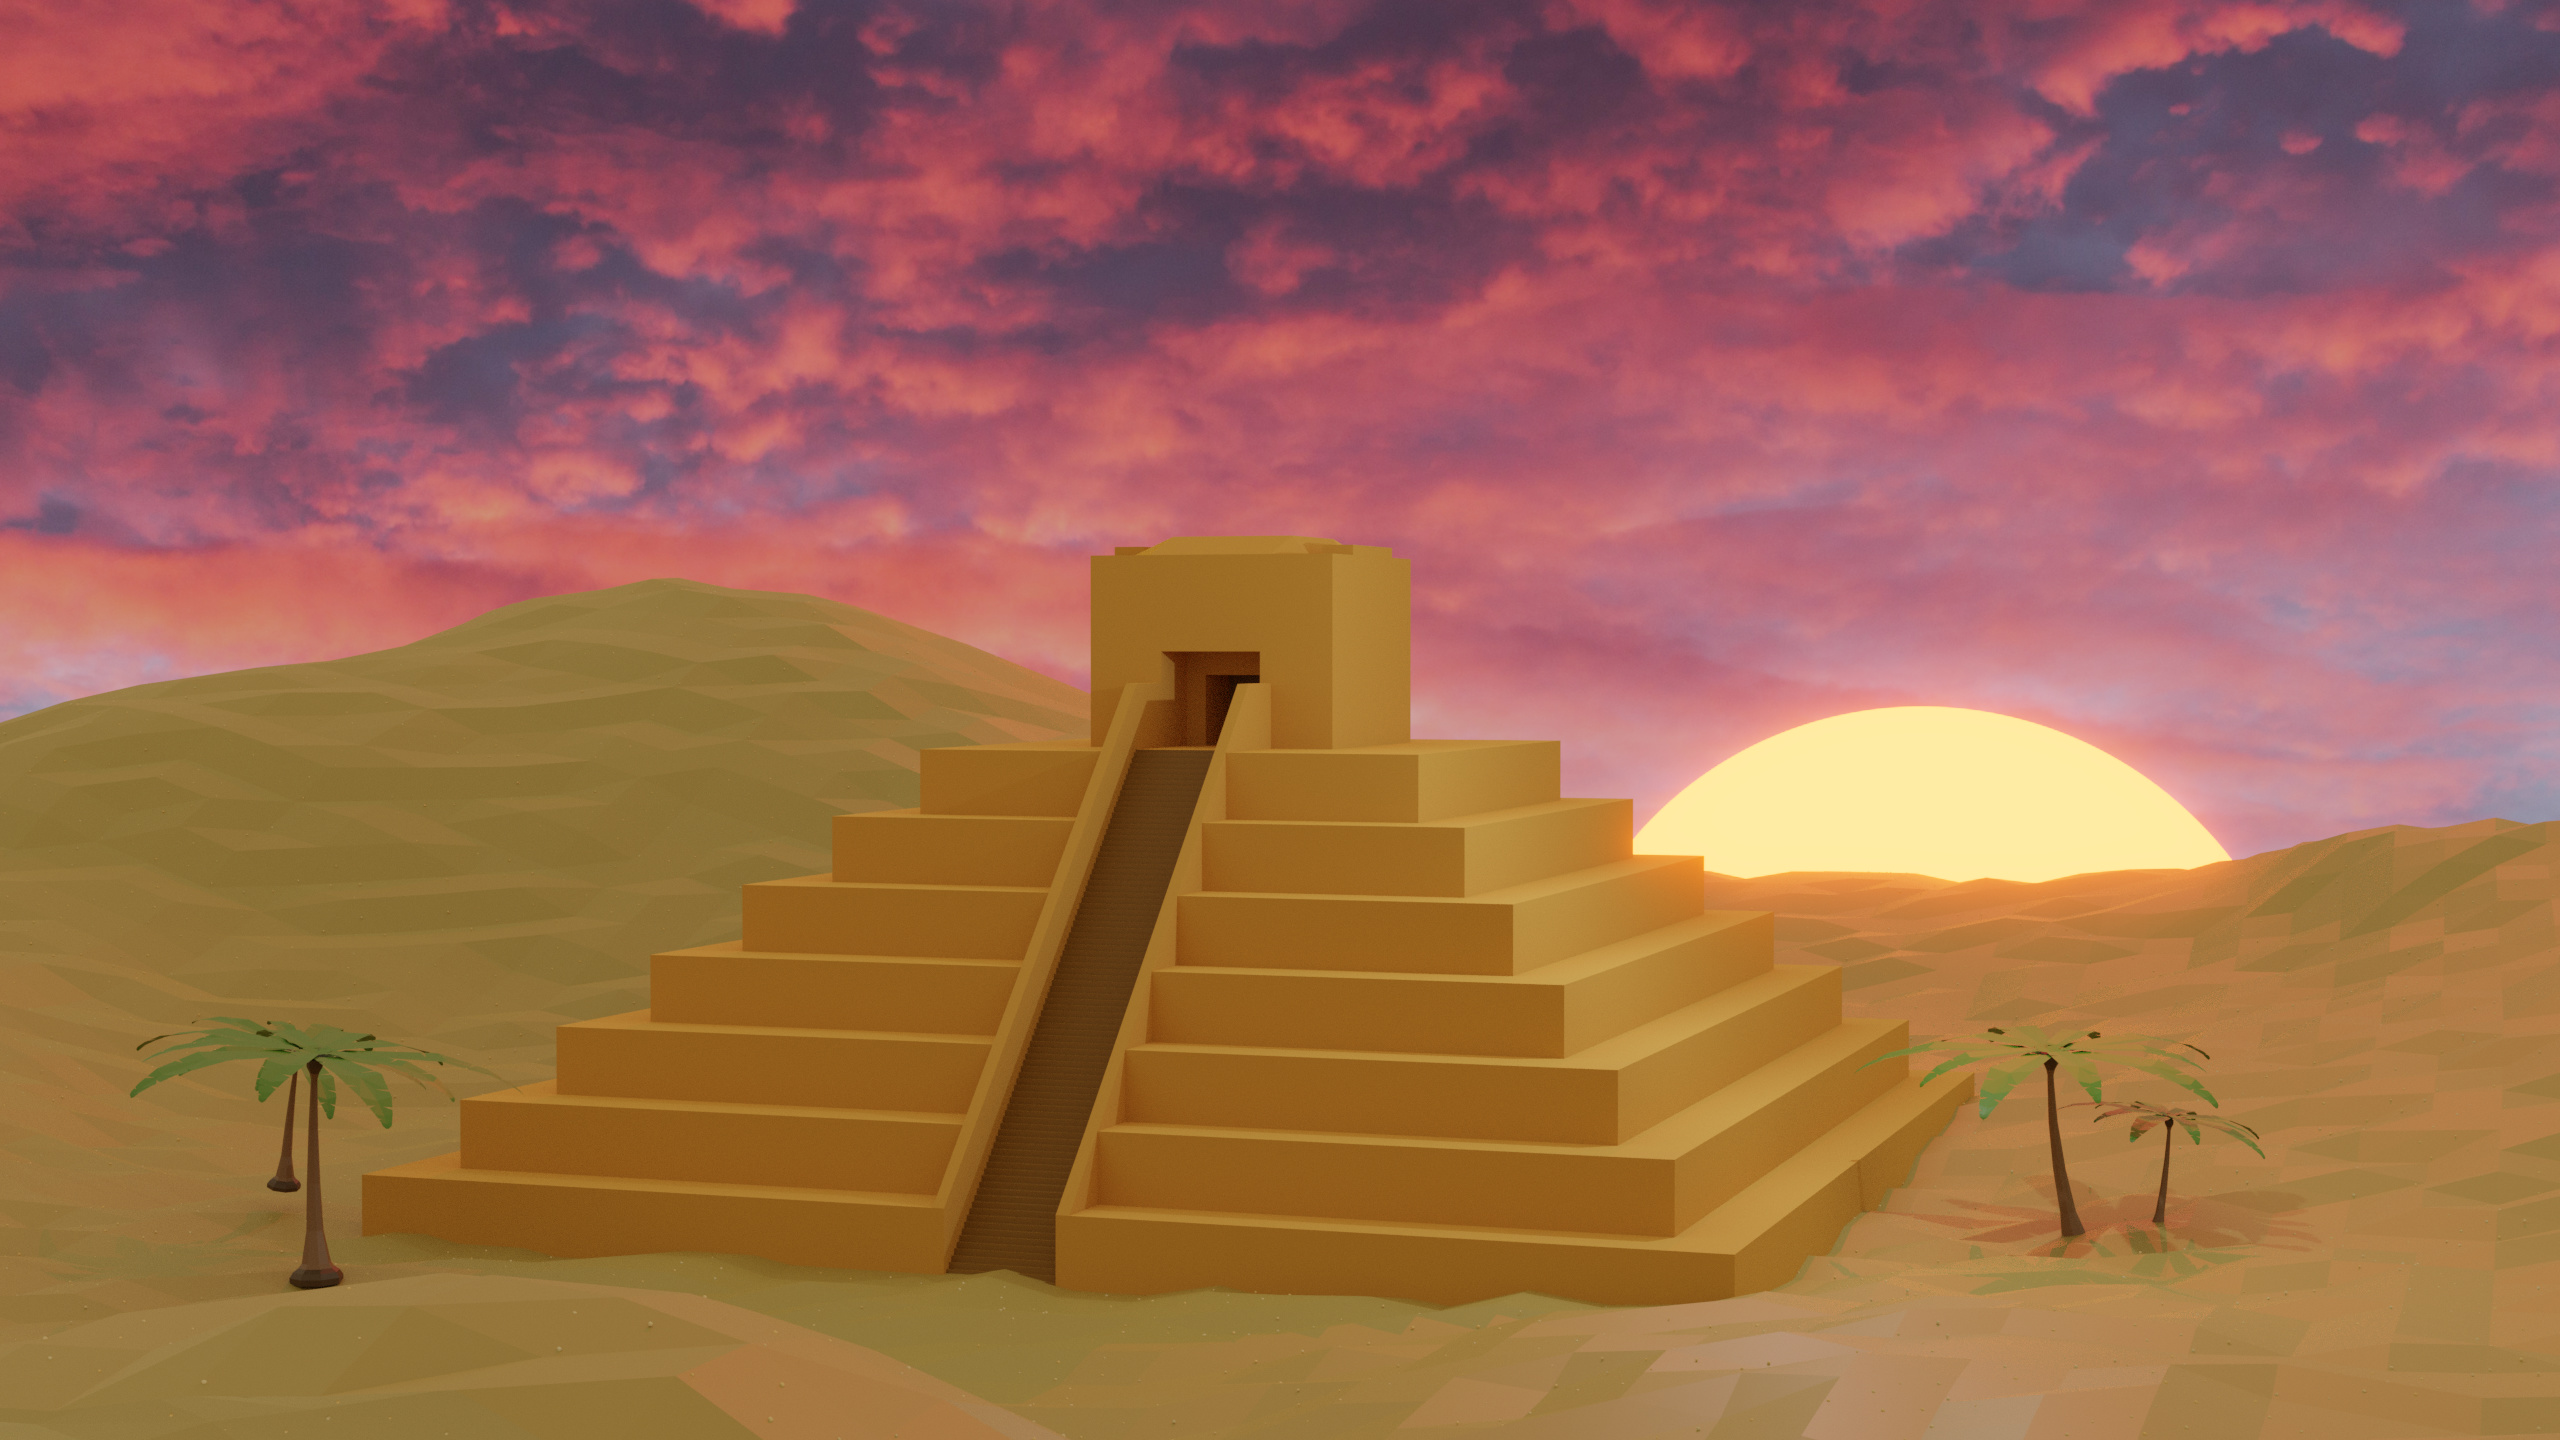 My pyramid (daylight and sunset scenes) - Show - GameDev.tv